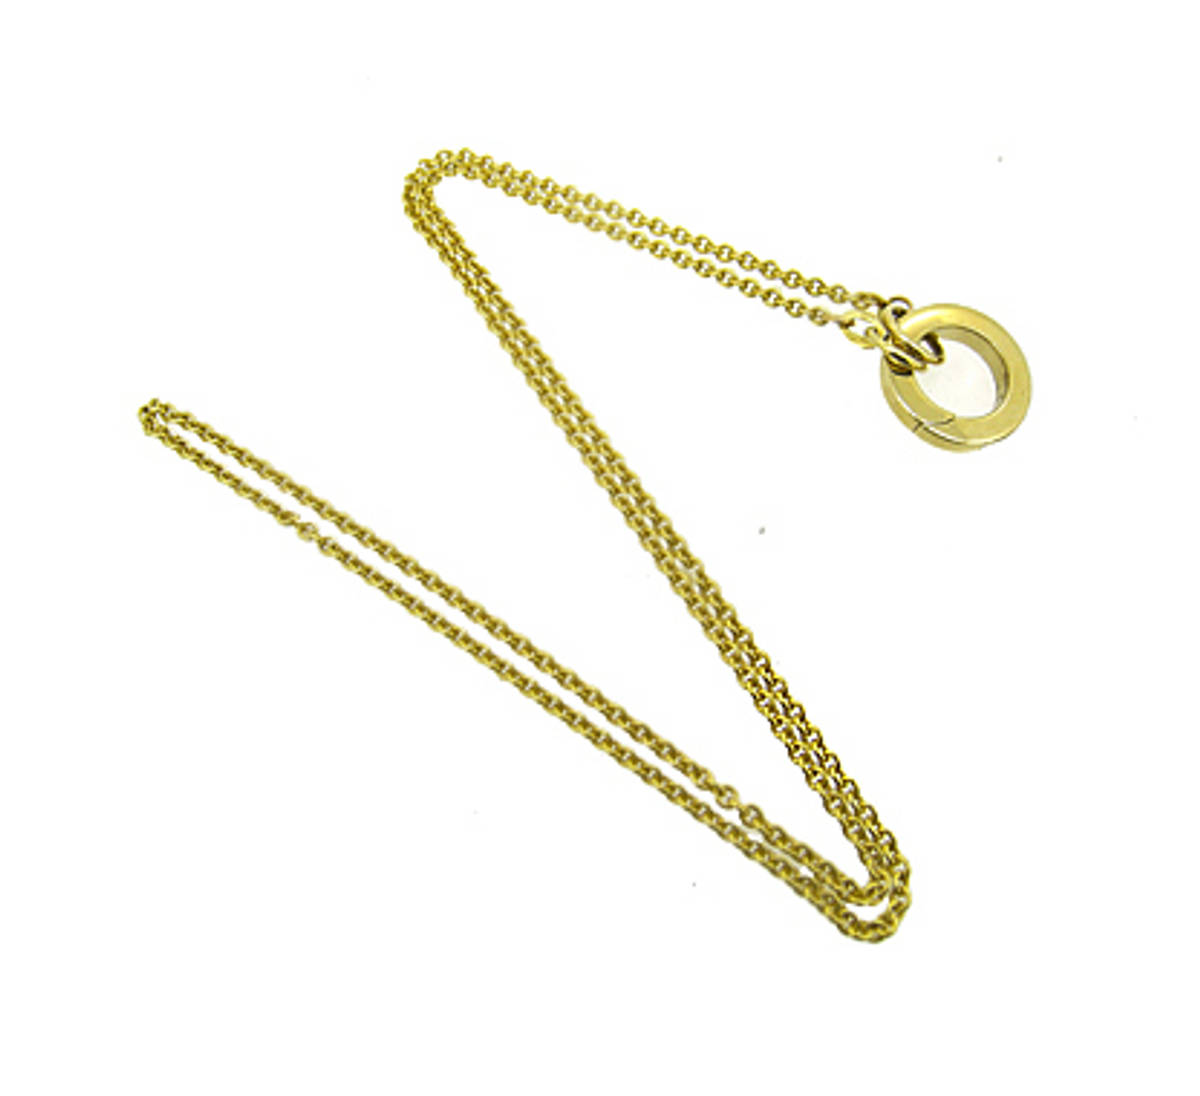 9k yellow gold 18” catch/chain necklace
Made in Ireland